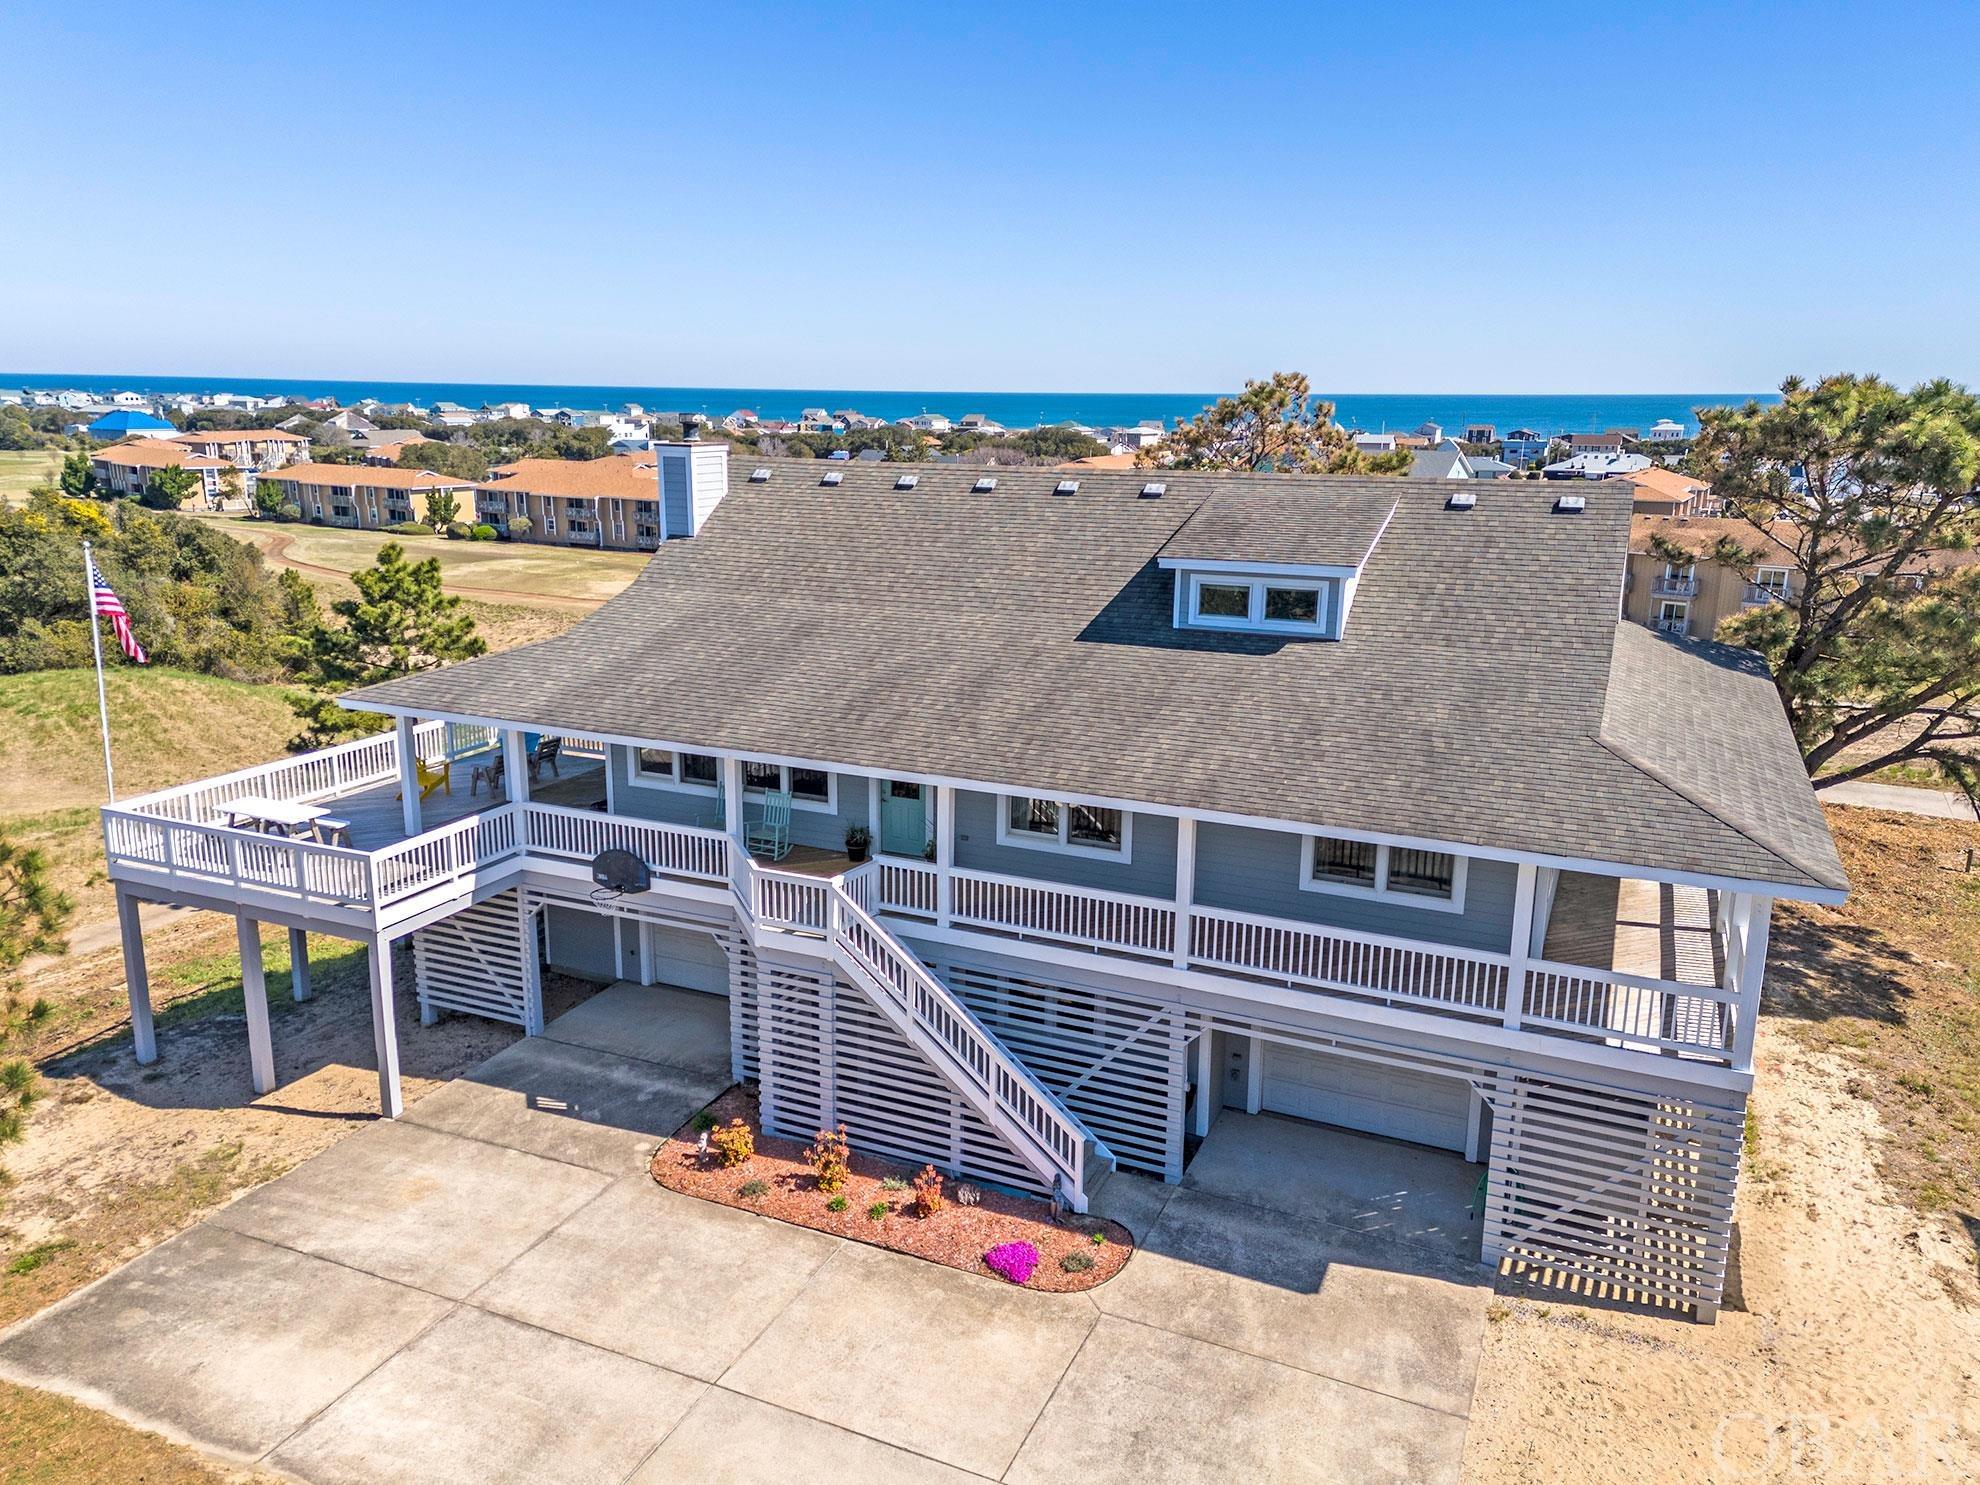 Welcome to your Outer Banks dream beach house! This exceptional home,  thoughtfully designed by the owner, offers many features that set it apart from the competition and has room for a pool.  The first thing to catch your attention is sure to be the impressive high elevation with ocean views from every level.  The floorplan is extremely functional.  As you ascend the stairs to the full wrap-around covered porch you will be drawn to the views of the 18th green of Sea Scape Golf Links to the north and the magnificence of the Atlantic to the east. The very same views are the best feature of the spacious great room area that serves as the heart of the home. The spacious kitchen provides lots of counter space and tons of cabinets for storage with extra seating at the island. On this level you will also find three bedrooms, including a large ensuite with a walk-in closet and, you guessed it, those amazing ocean views. Up one more level you will enter a remarkable bonus room with endless possibilities and more ocean views.  In the lower level of the home you will find many nice surprises including an oversized bedroom that would make the perfect guest room with a full bath just down the hall. The utility room is also located on this level along with a separate workshop and TWO separate full-sized garages. It is built to last with purpose driven attention to detail everywhere you turn, like a generator panel installed, so you can rest easy knowing that your home is prepared for any unexpected power outages. The upgraded Manabloc plumbing system centralizes and organizes the plumbing lines, allowing for easy access and control of the water distribution throughout the property. A  50 gallon Le Bleu water system gives you convenient access to premium drinking water. This location is a rare find with some of the highest elevations around. It offers convenience and a lifestyle like no other. Close to so much including the neighborhood Sandtrap Tavern at the Sea Scape clubhouse.  The beach and some of the best local food and beverage establishments on the OBX are within walking/biking distance. This one has to be seen to be appreciated. Don't miss the virtual tour link. Want to add a pool? The Seller has preliminary approval from the town to add a 9'1" x 17'5" pool.